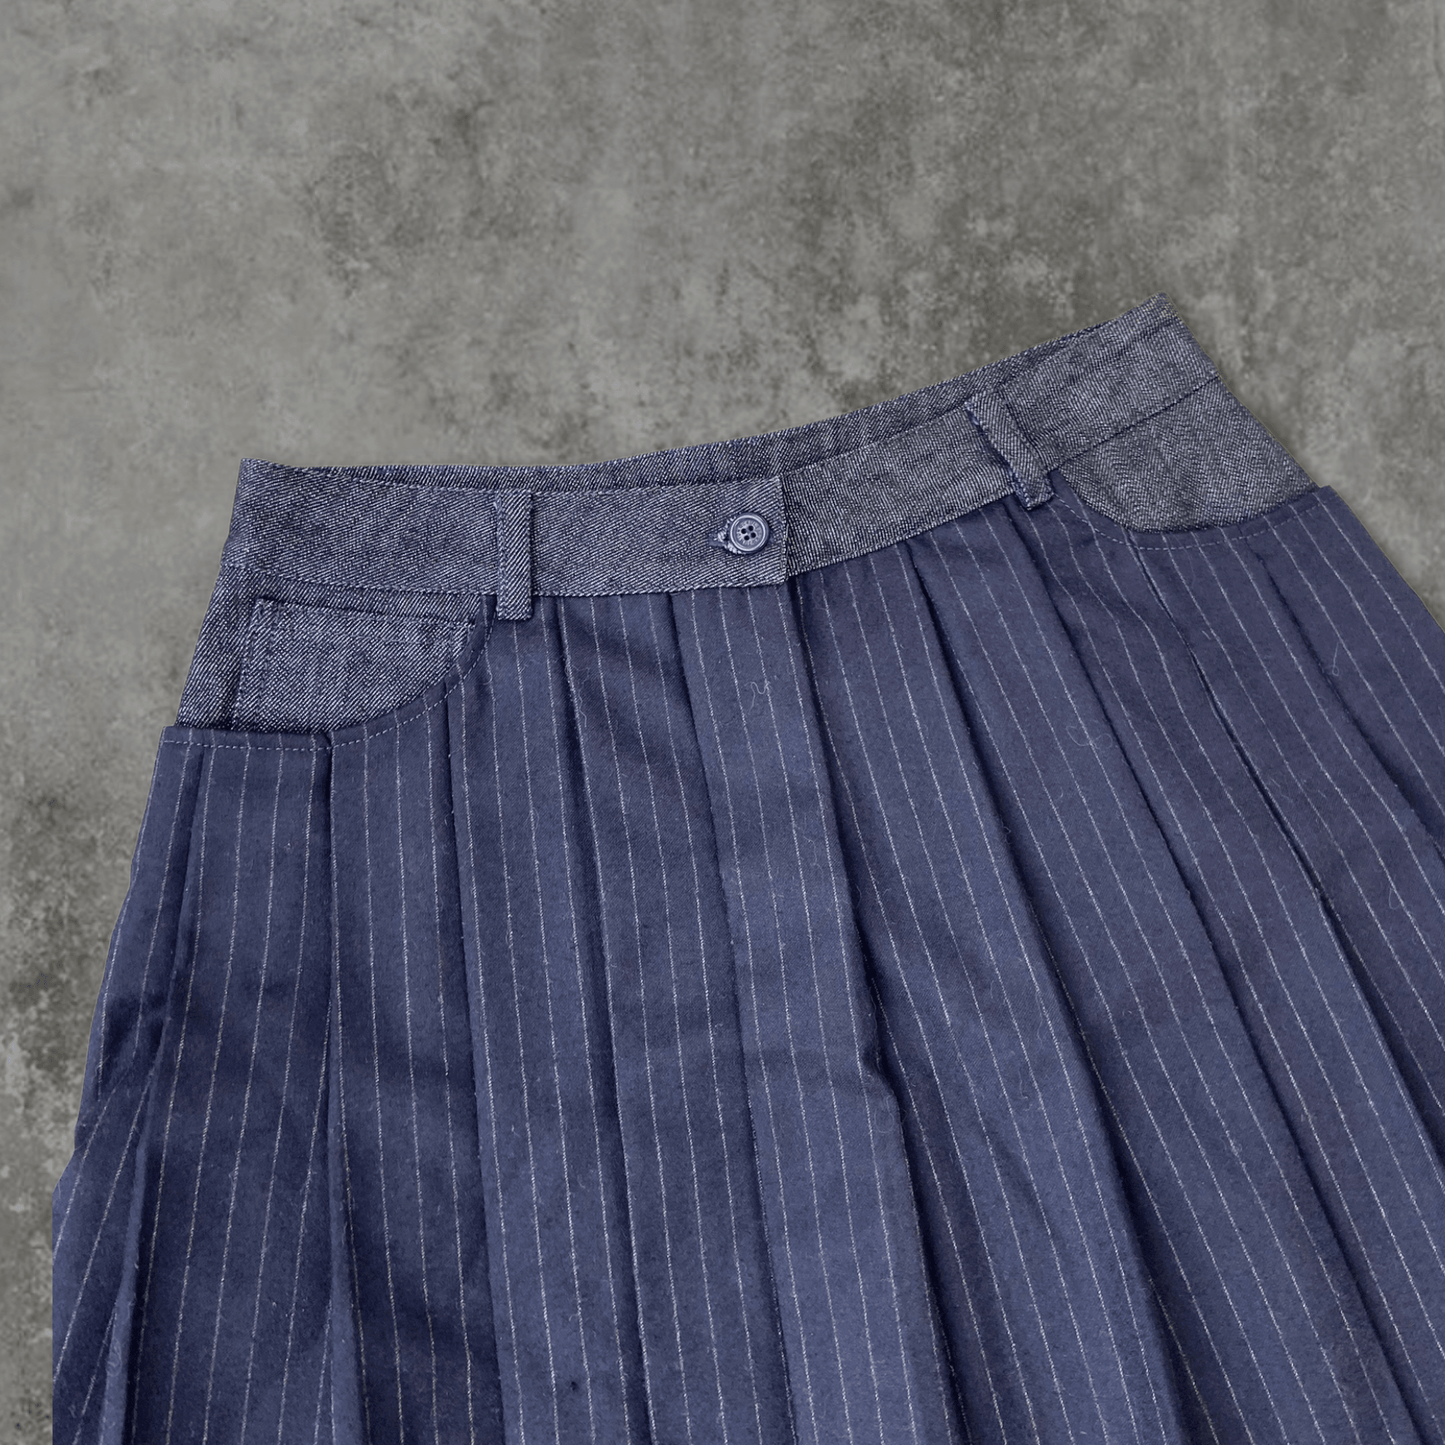 JUNIOR GAULTIER PLEATED SKIRT - S - Known Source